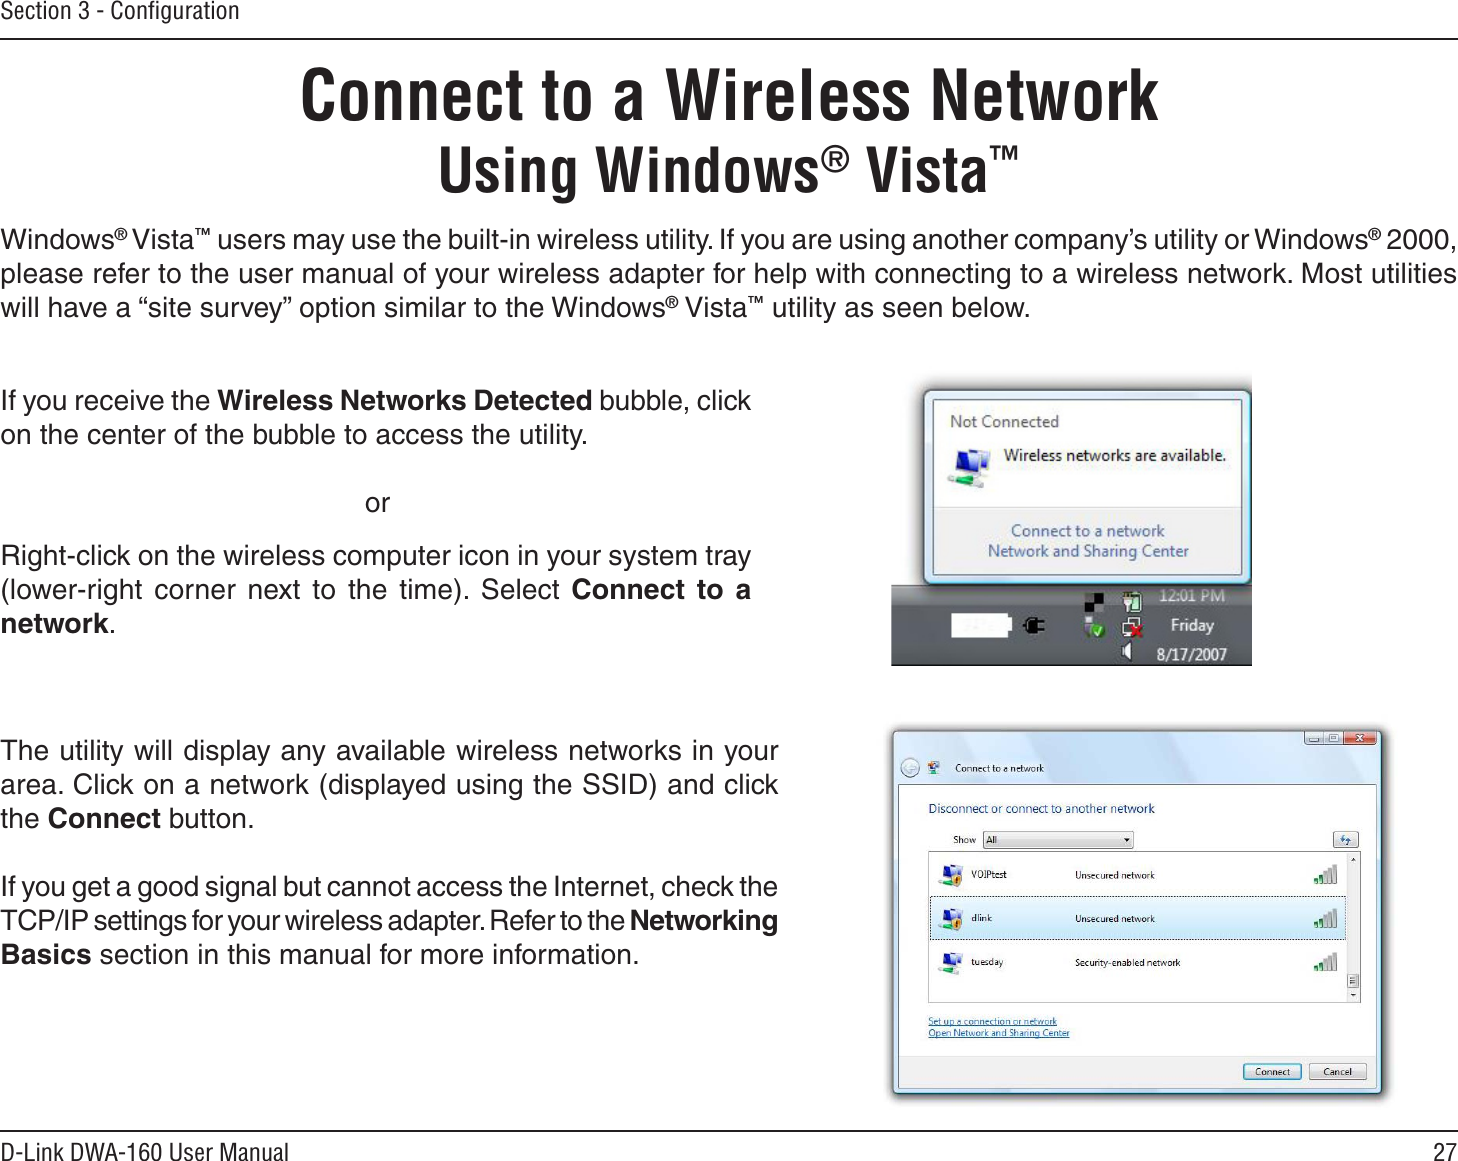 27D-Link DWA-160 User ManualSection 3 - ConﬁgurationConnect to a Wireless NetworkUsing Windows® Vista™Windows® Vista™ users may use the built-in wireless utility. If you are using another company’s utility or Windows® 2000, please refer to the user manual of your wireless adapter for help with connecting to a wireless network. Most utilities will have a “site survey” option similar to the Windows® Vista™ utility as seen below.Right-click on the wireless computer icon in your system tray (lower-right corner next to the time). Select Connect to a network.If you receive the Wireless Networks Detected bubble, click on the center of the bubble to access the utility.     orThe utility will display any available wireless networks in your area. Click on a network (displayed using the SSID) and click the Connect button.If you get a good signal but cannot access the Internet, check the TCP/IP settings for your wireless adapter. Refer to the Networking Basics section in this manual for more information.